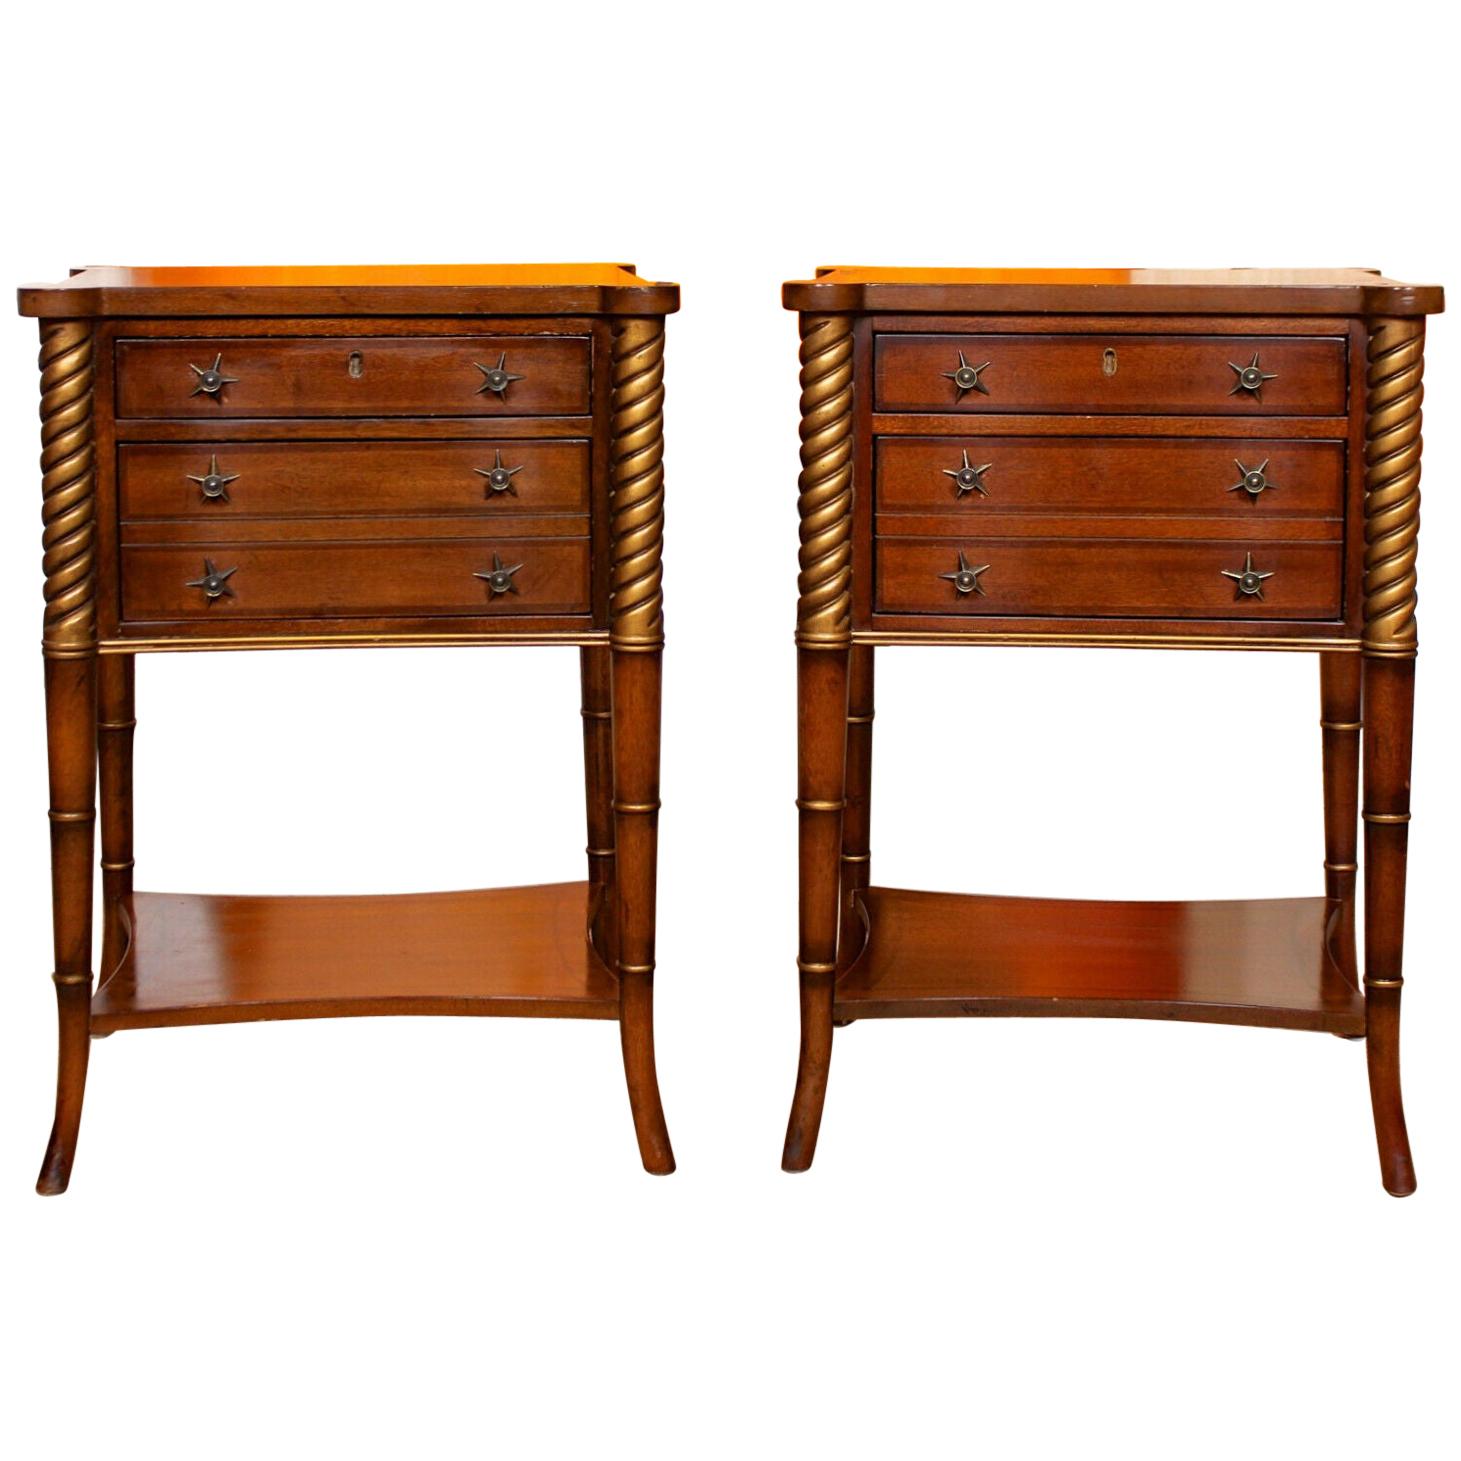 Pair of Side Tables Inlaid Mahogany Drexel Heritage Bedside Chest of Drawers